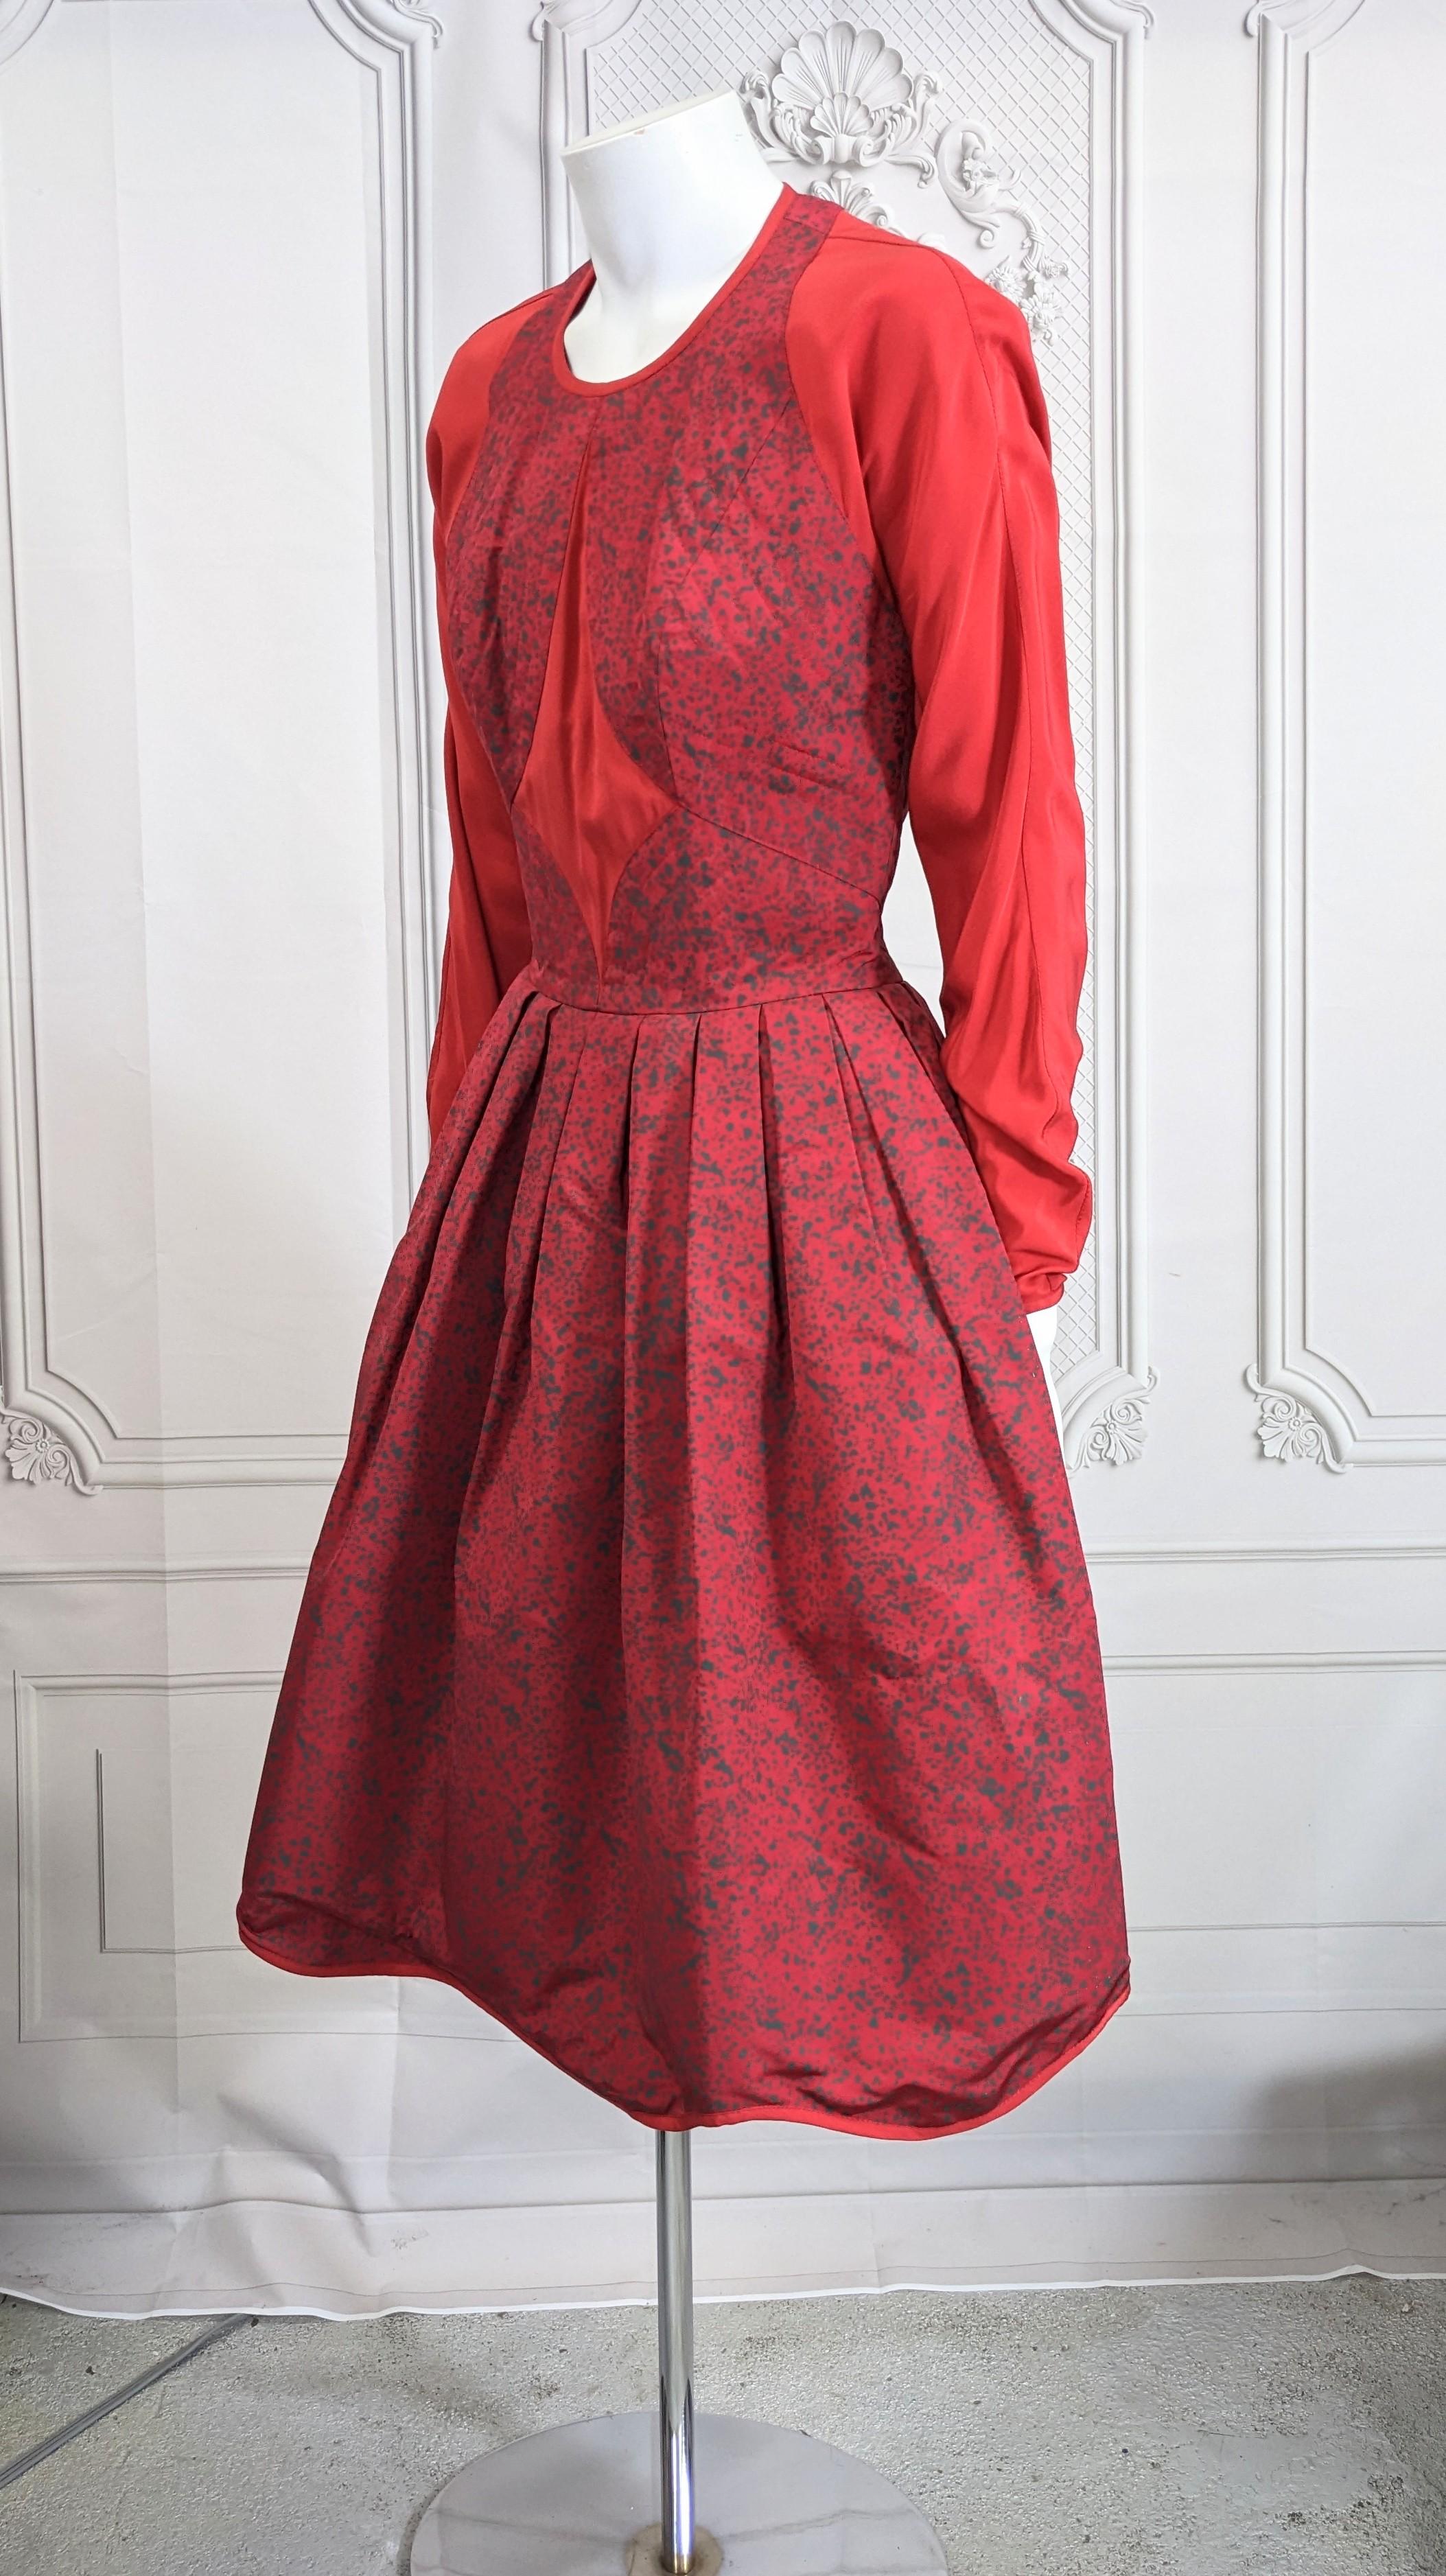 Geoffrey Beene Taffetta Cocktail Dress In Good Condition For Sale In New York, NY